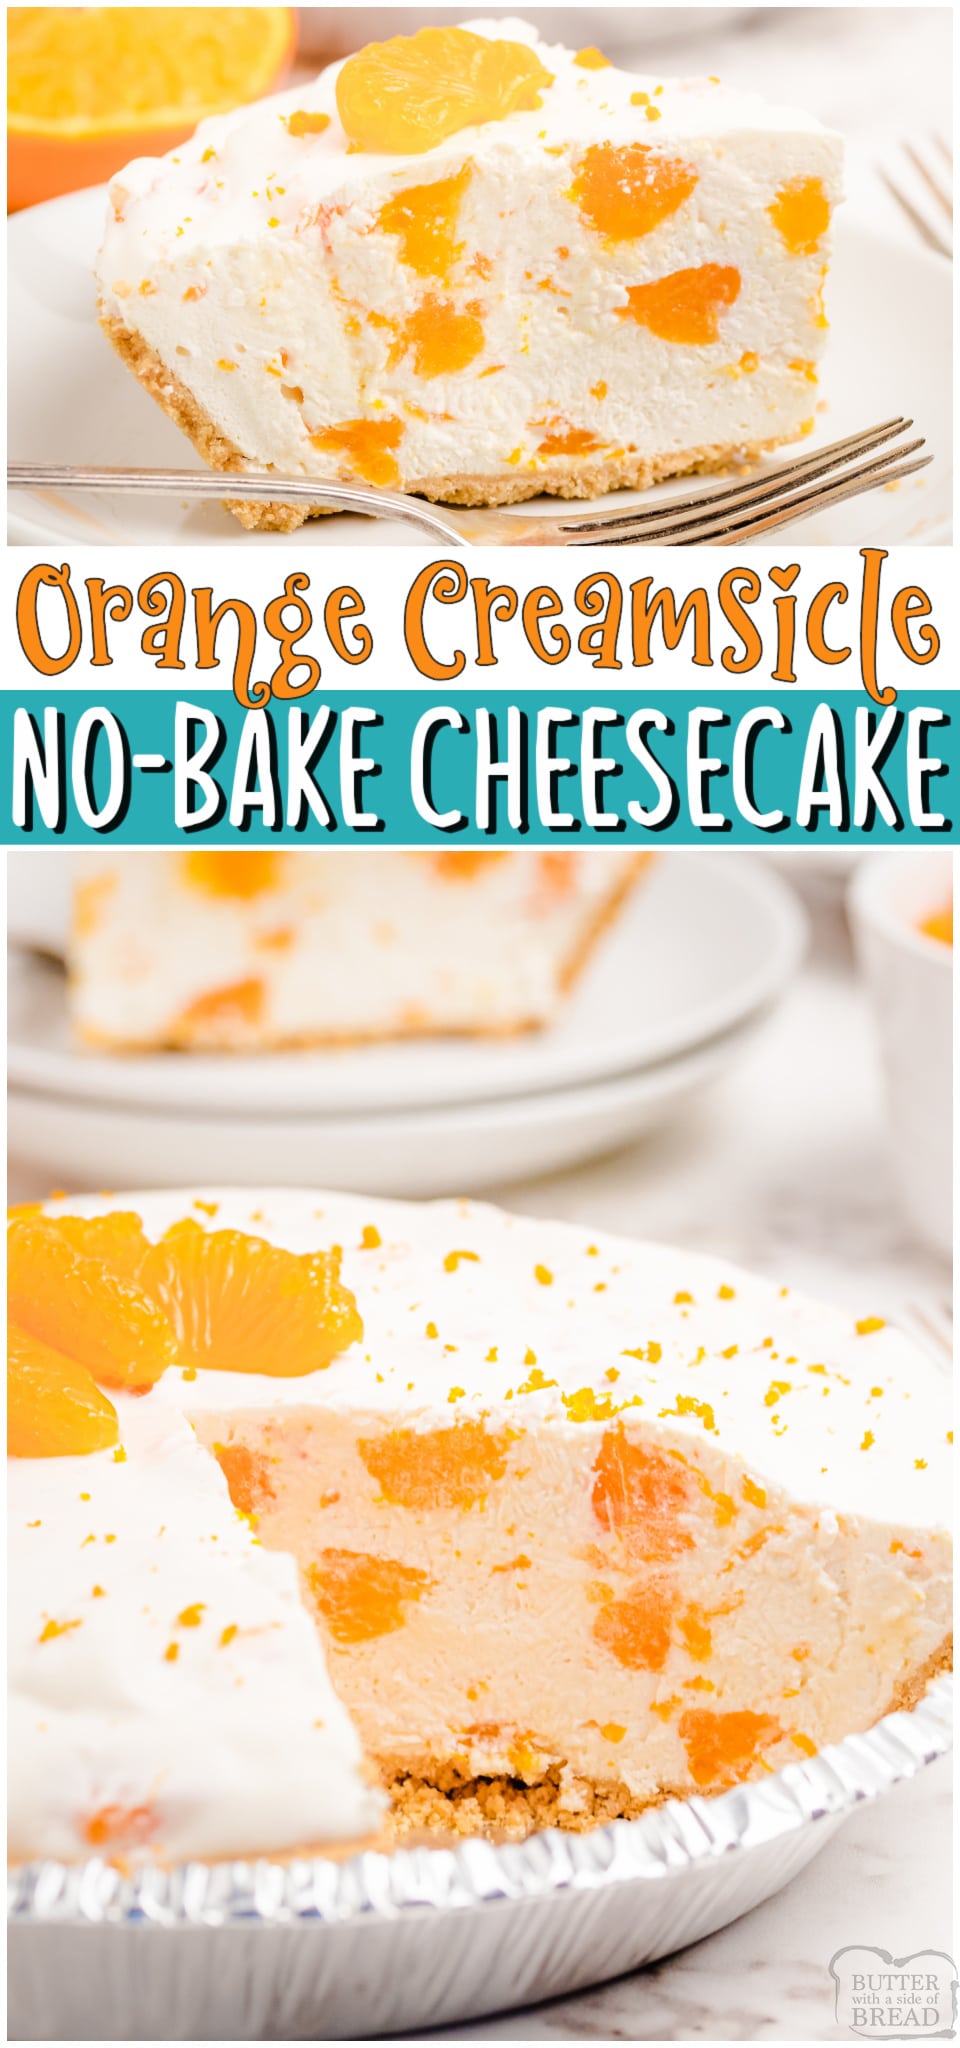 Orange Creamsicle Cheesecake made with cream cheese, oranges, whipped topping and orange juice! Simple & creamy no-bake cheesecake recipe with a lovely citrus flavor! #cheesecake #nobake #orange #dessert #easyrecipe from BUTTER WITH A SIDE OF BREAD